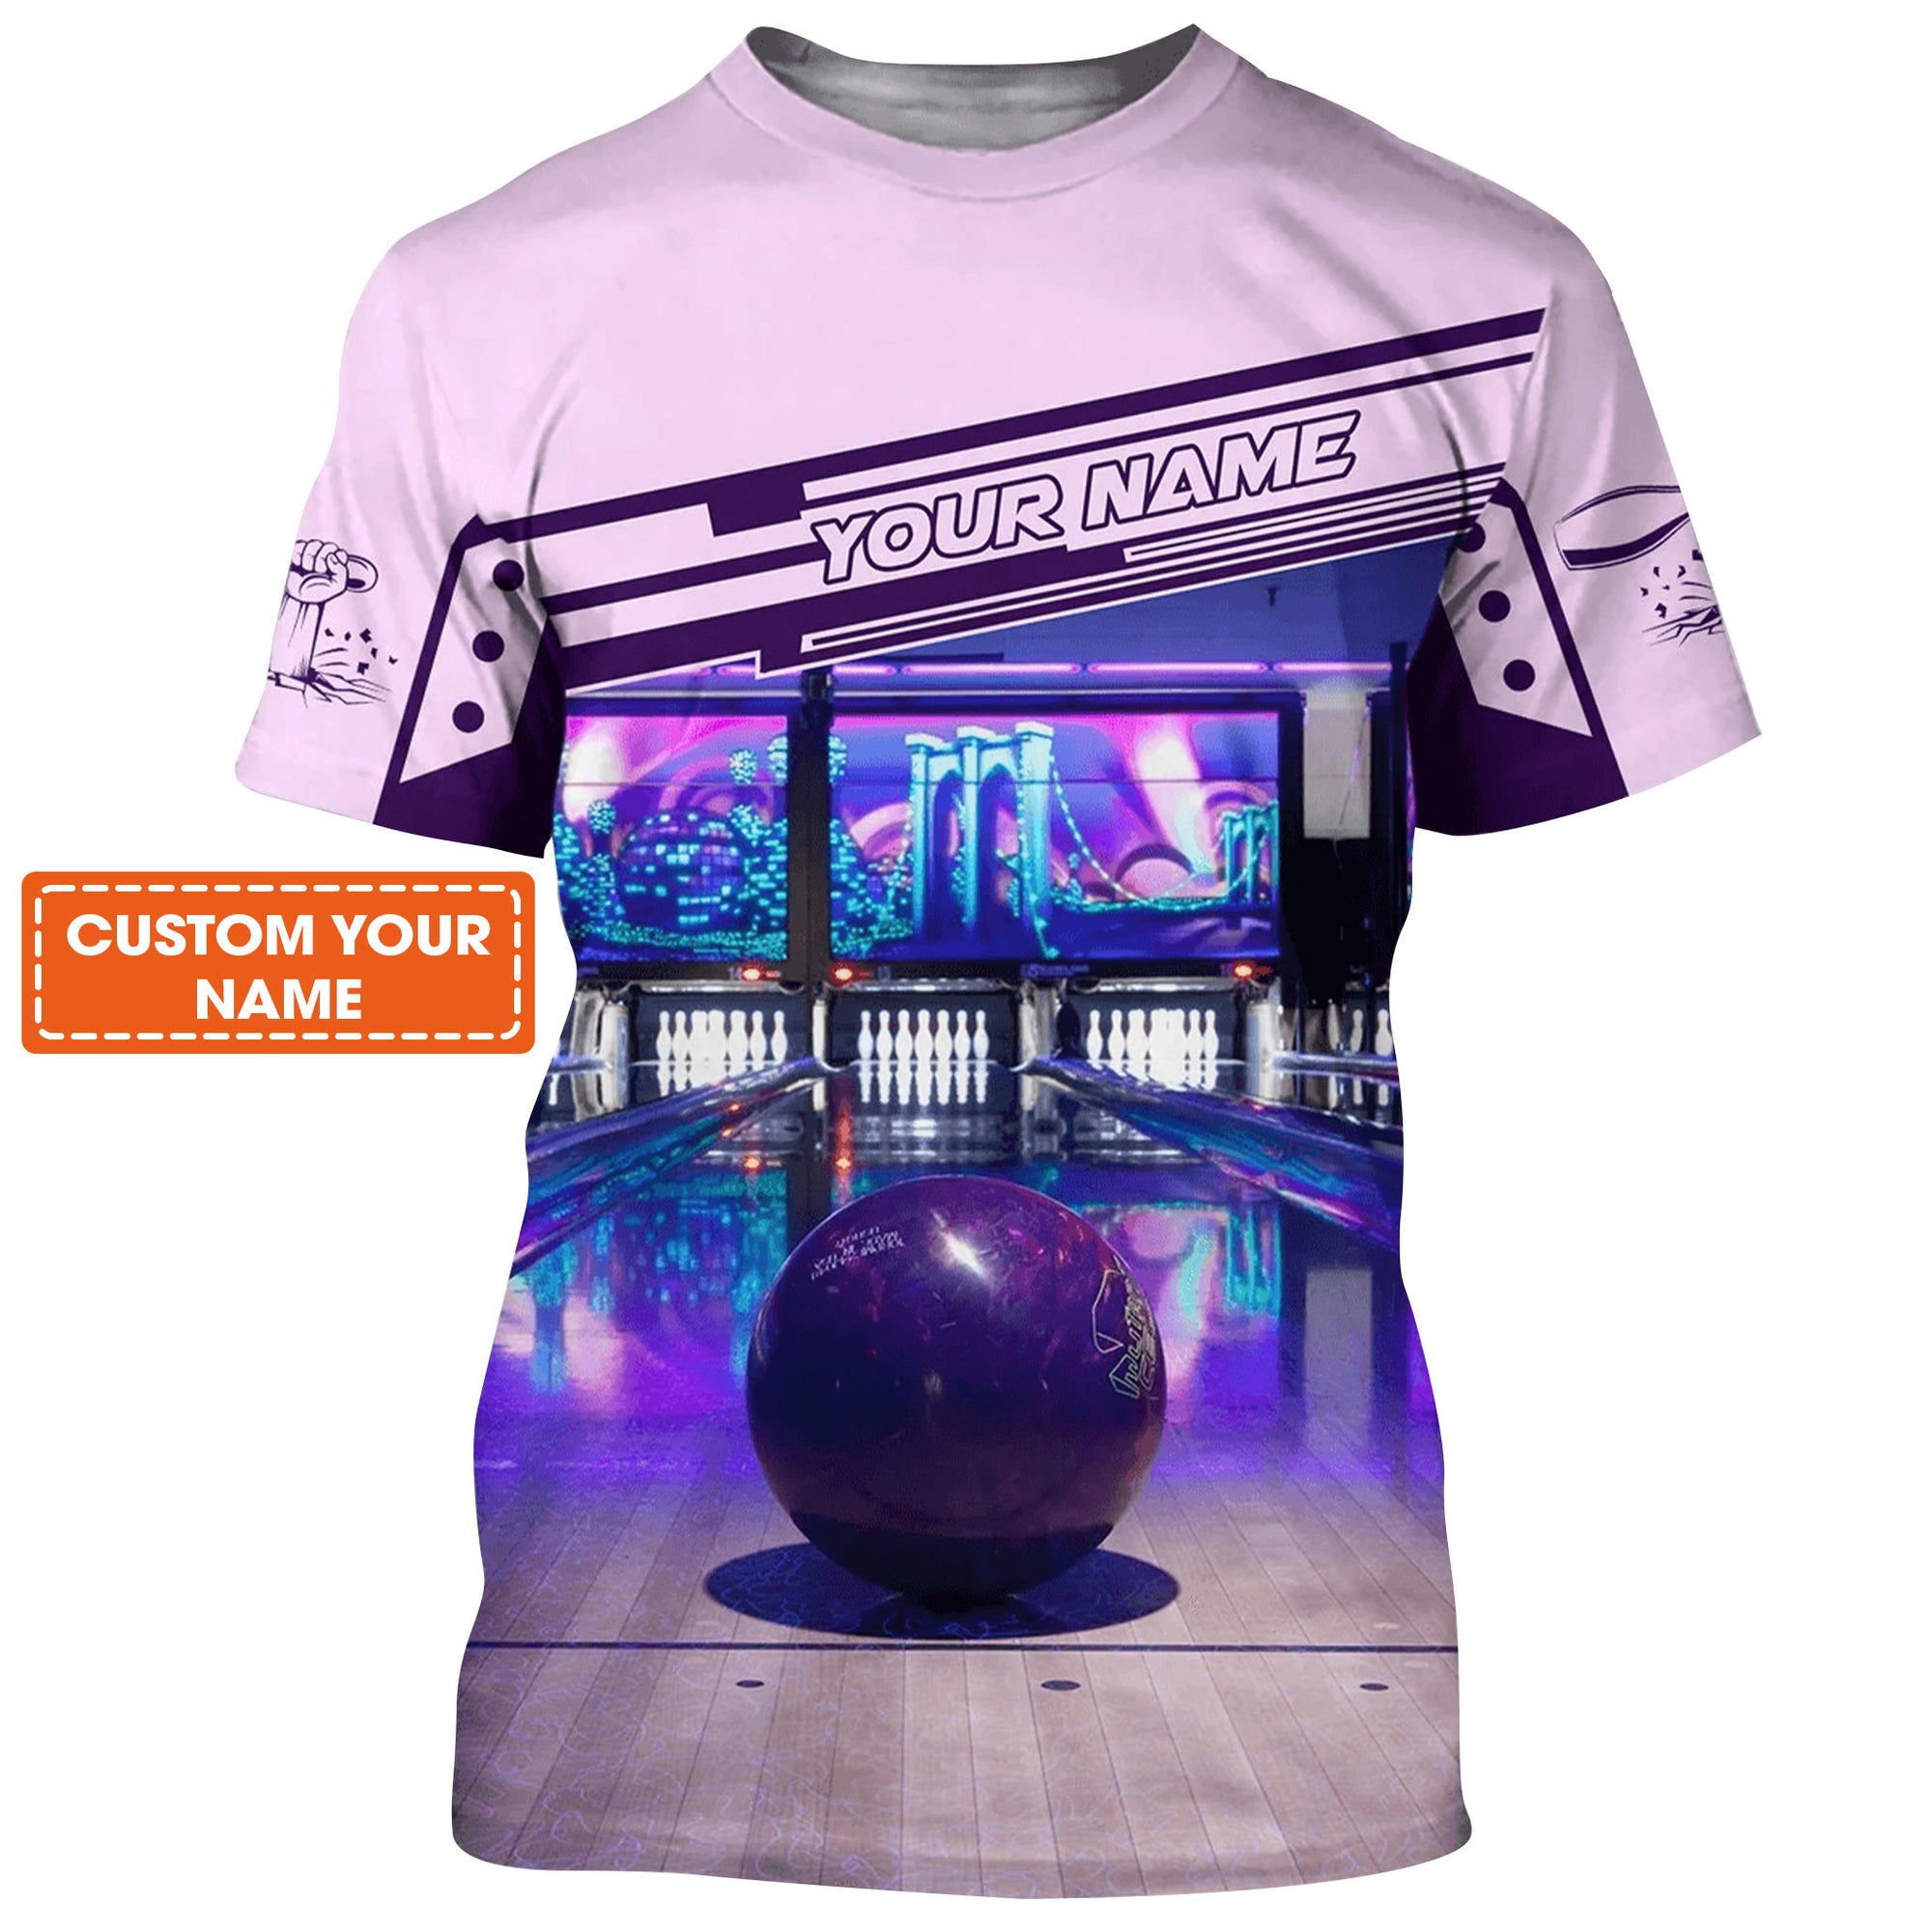 Customized Name Bowling T Shirt, Personalized Name Bowling Shirt For Women, Bowling Team Players Shirt - Best Gift For Ladies, Bowling Lovers